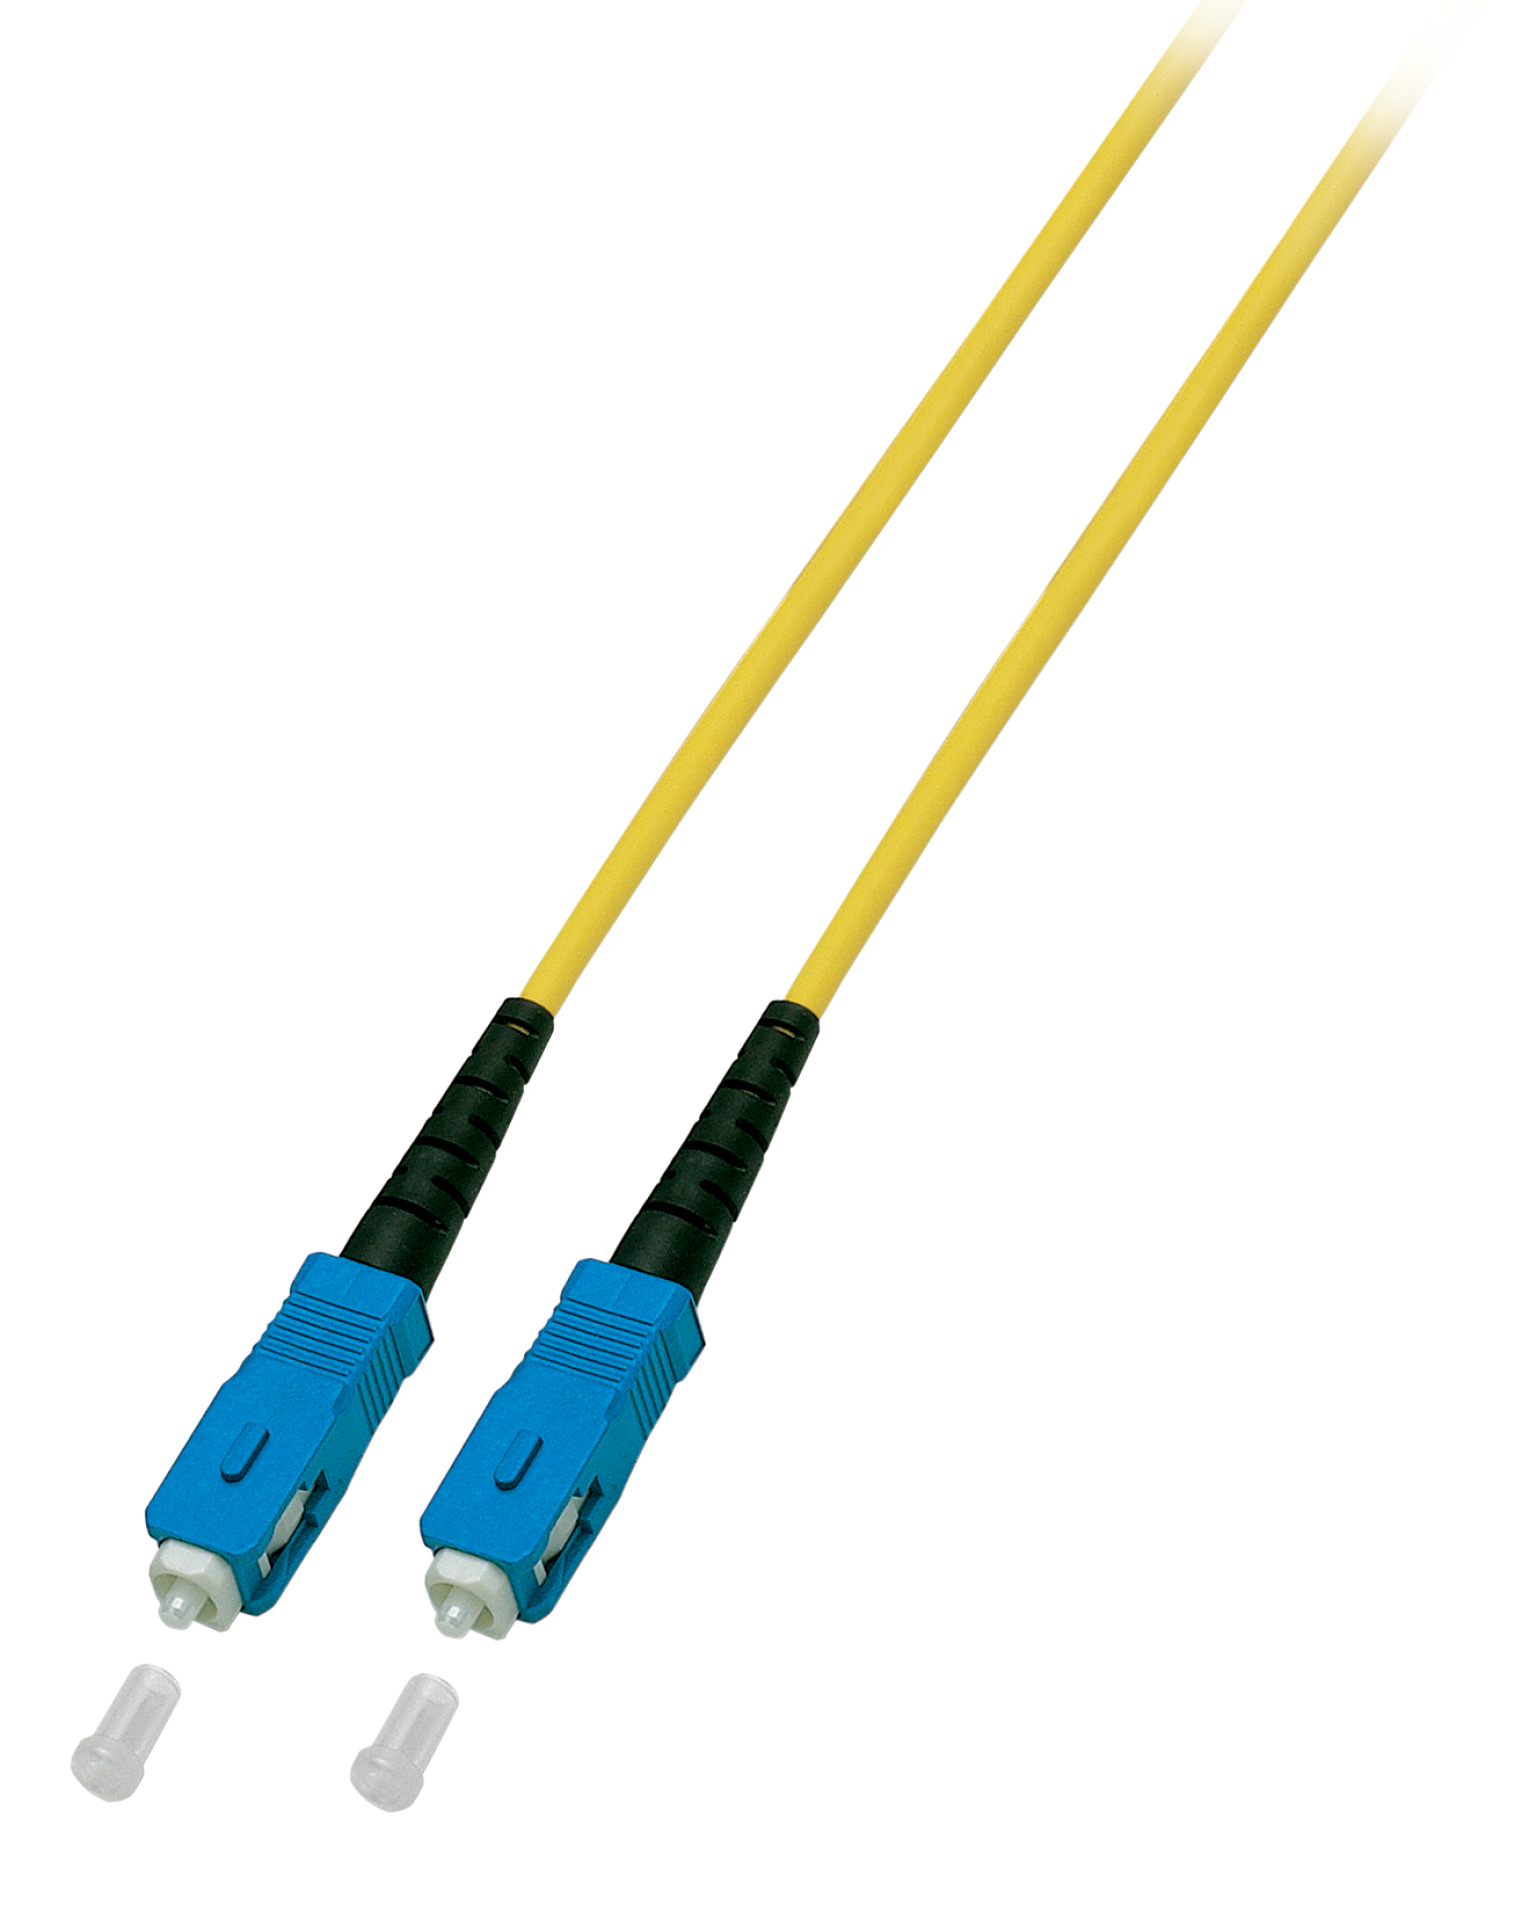 Simplex FO Patch Cable SC-SC G657.A2 15m 3,0mm yellow 9/125µm